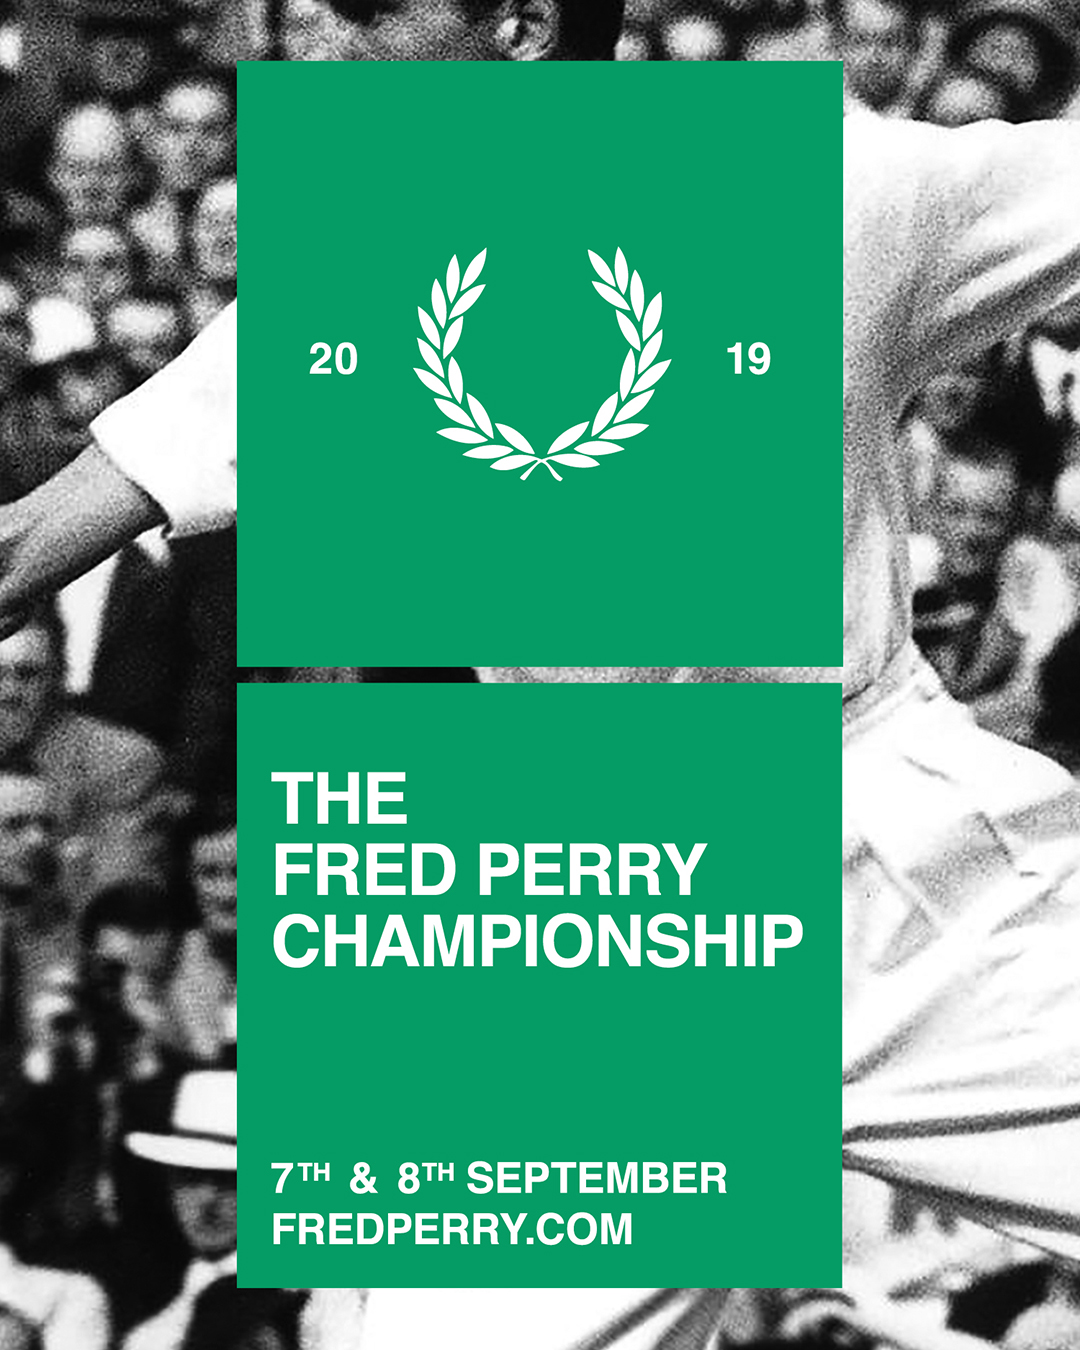 Introducing... The Fred Perry Championship Proper Magazine